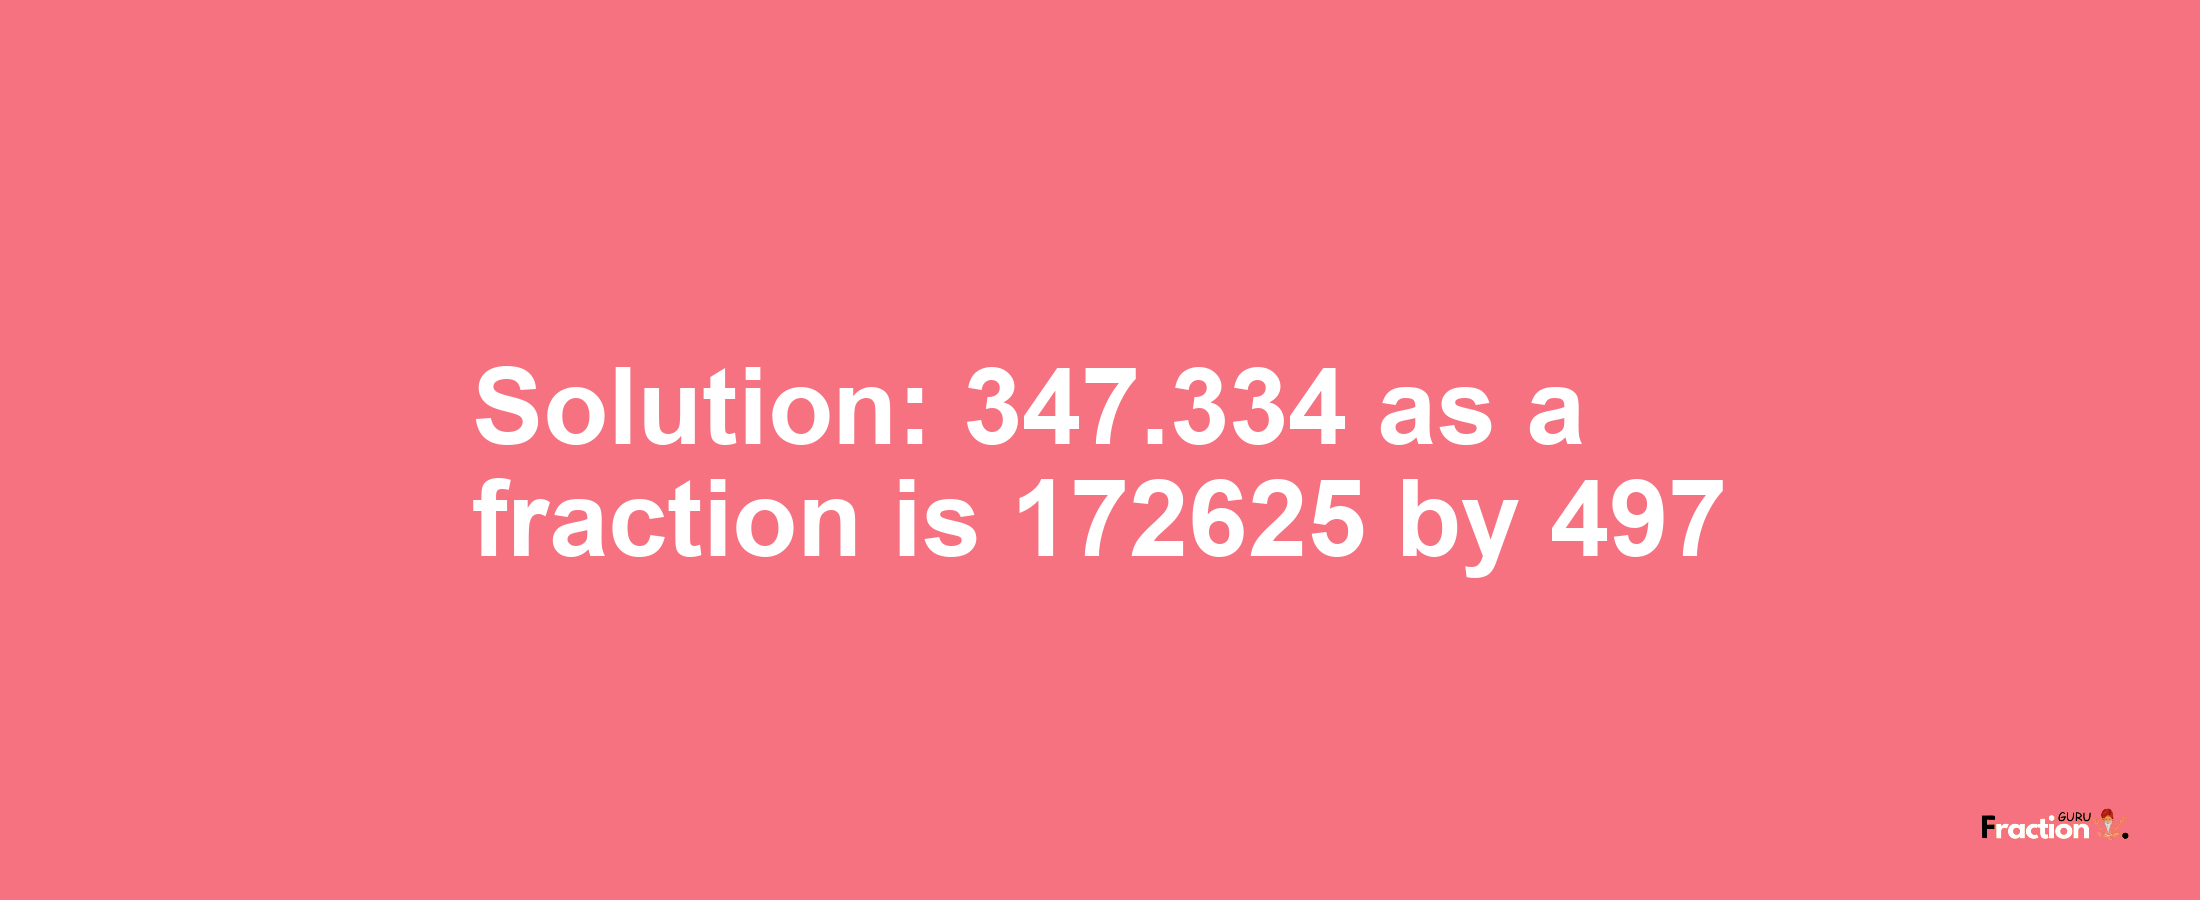 Solution:347.334 as a fraction is 172625/497